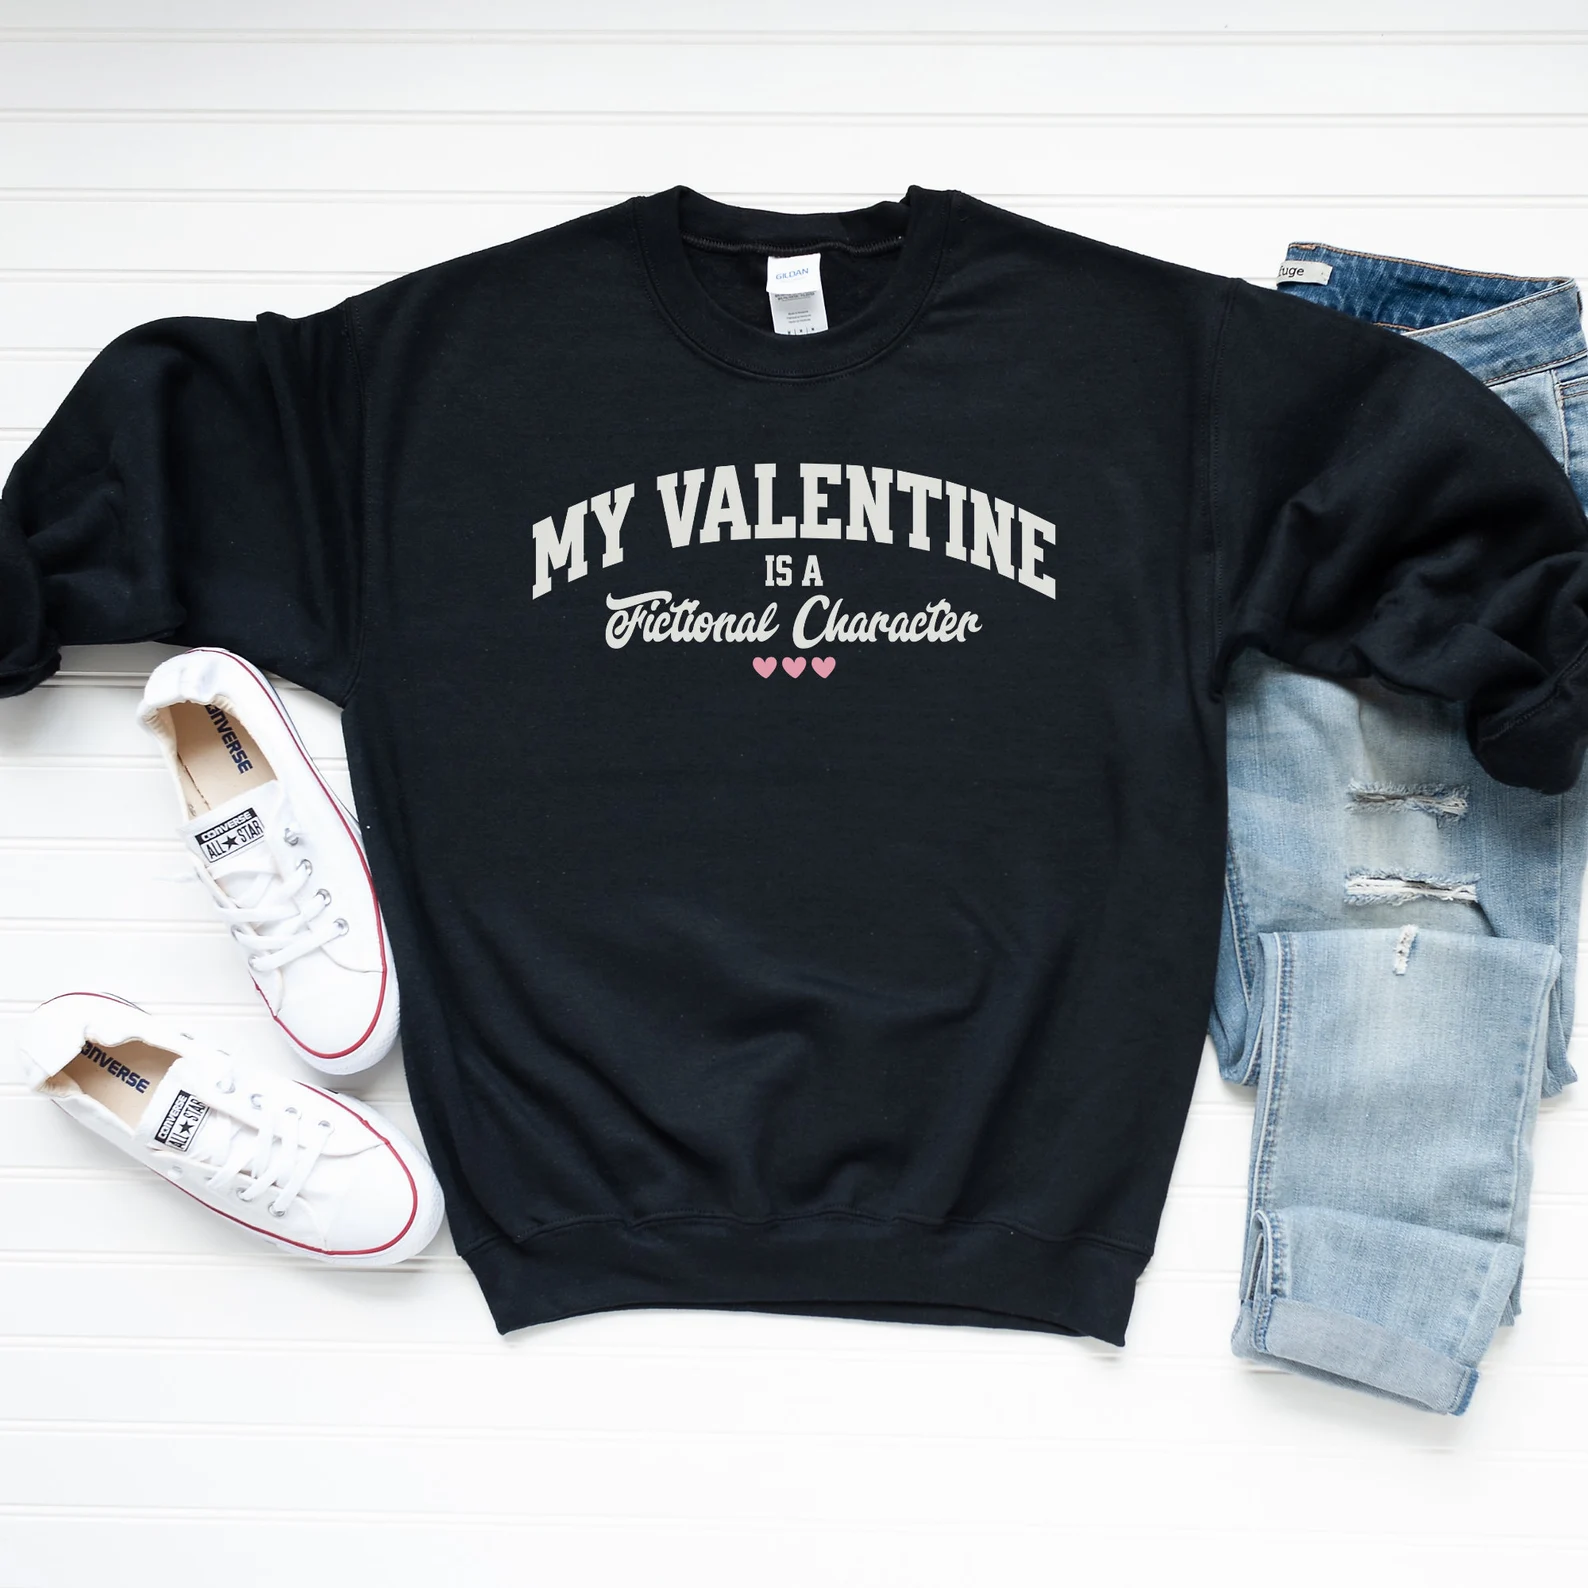 Image of a black sweatshirt that reads "my valentine is a fictional character."